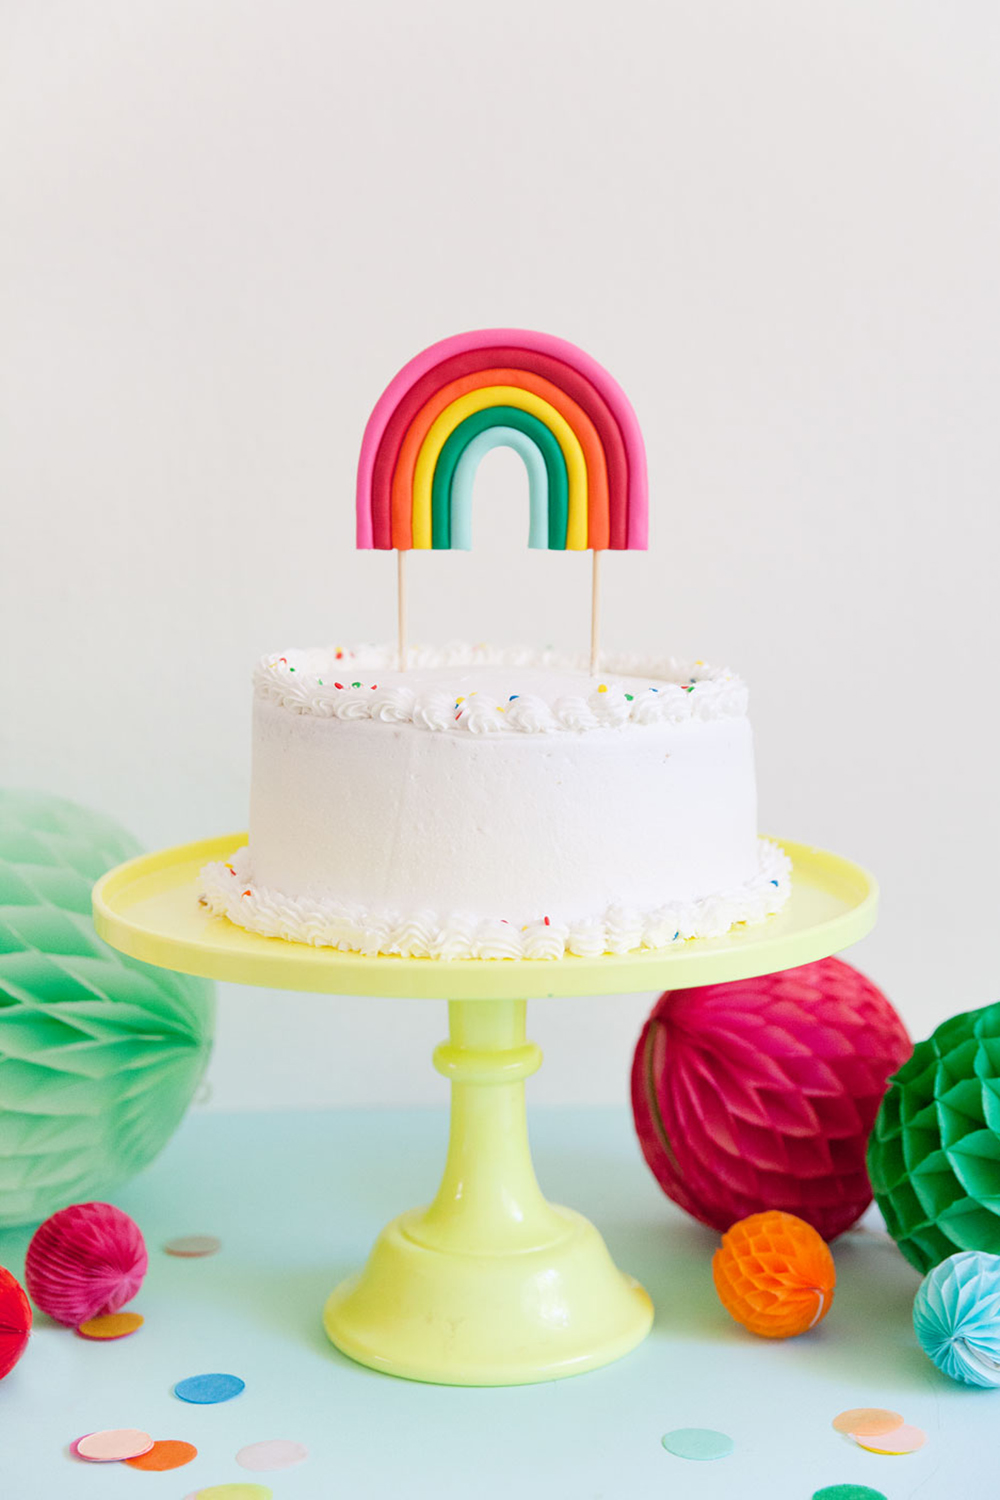 This DIY rainbow cake topper is the cutest and for sure the life of the party. Perfect for any rainbow or unicorn themed birthday parties.